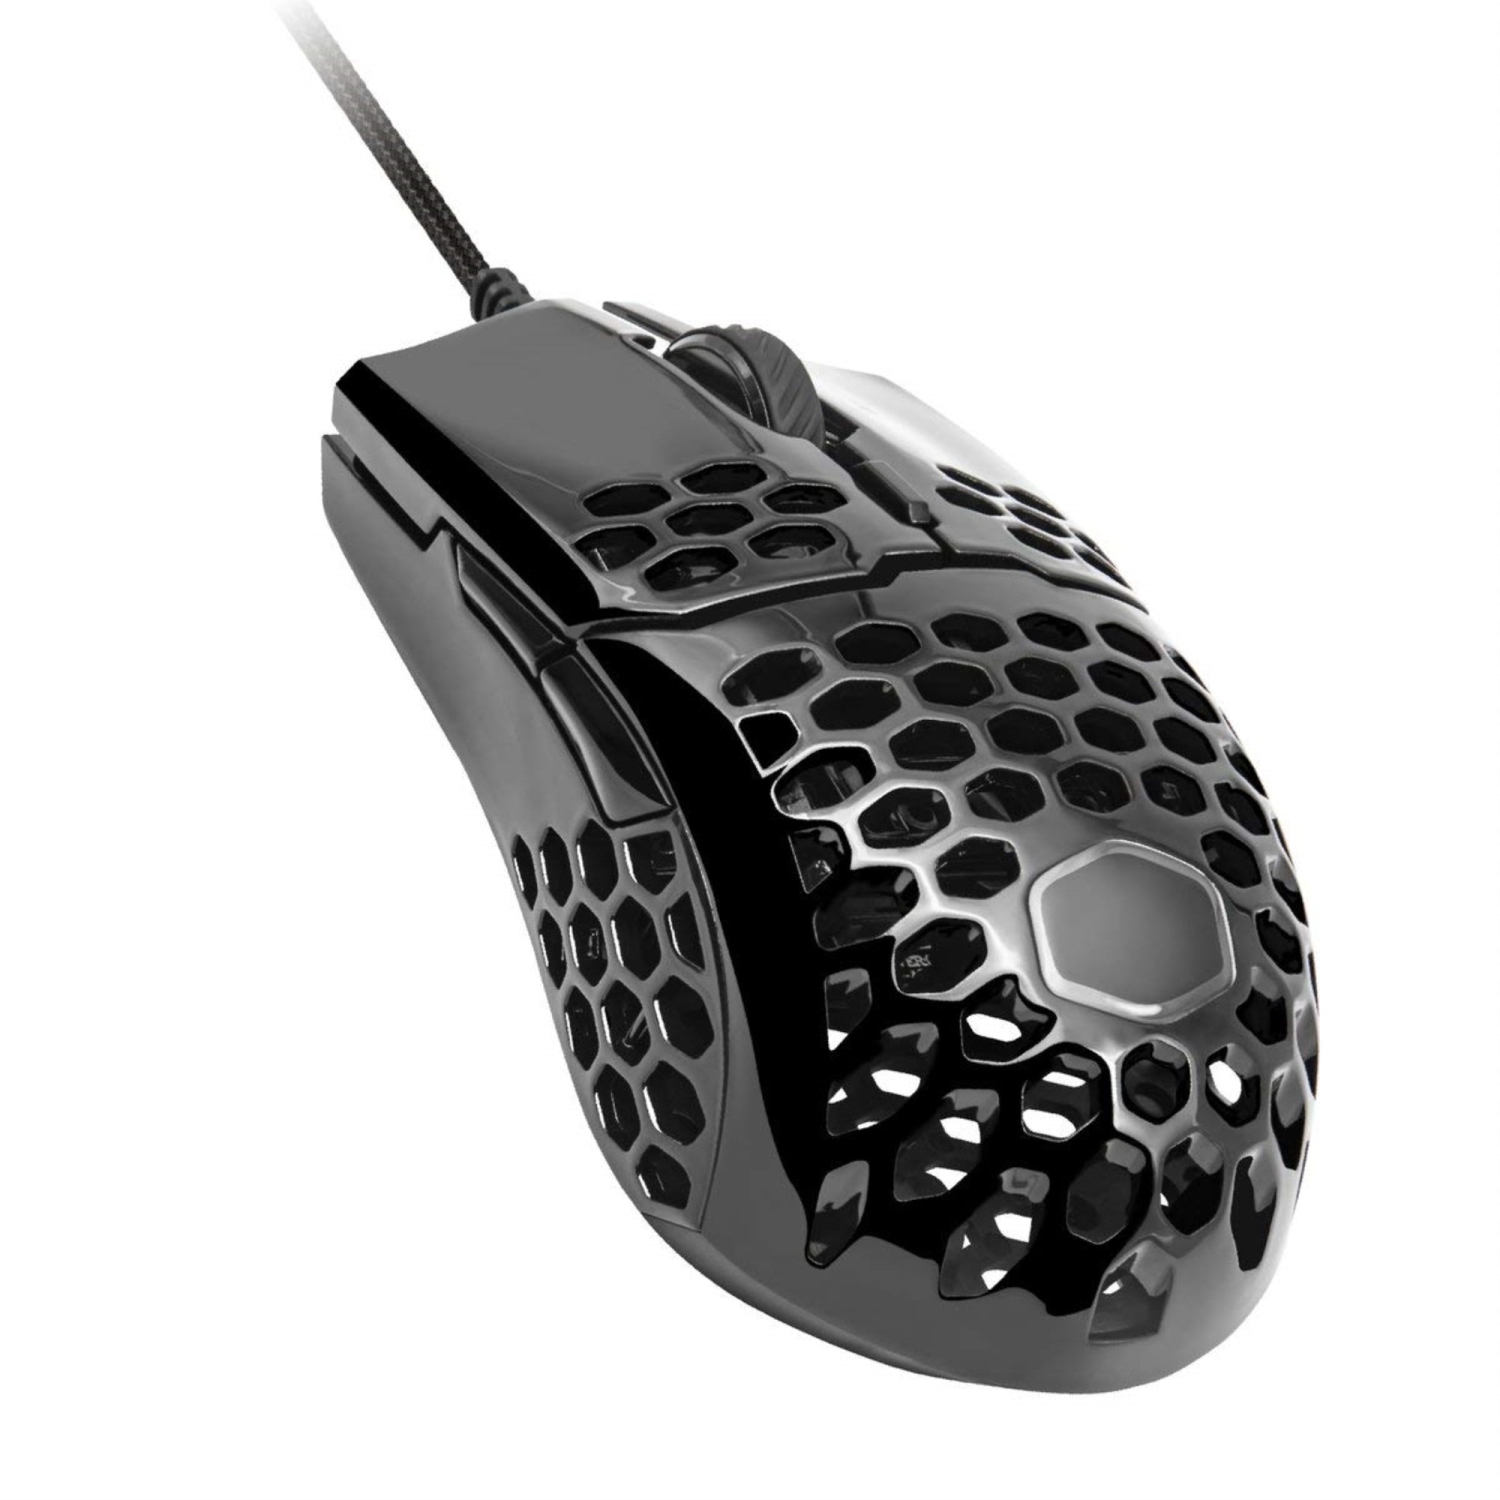 Cooler Master MM710 Wired Gaming Mouse 16000 DPI Optical Sensor, Glossy Black